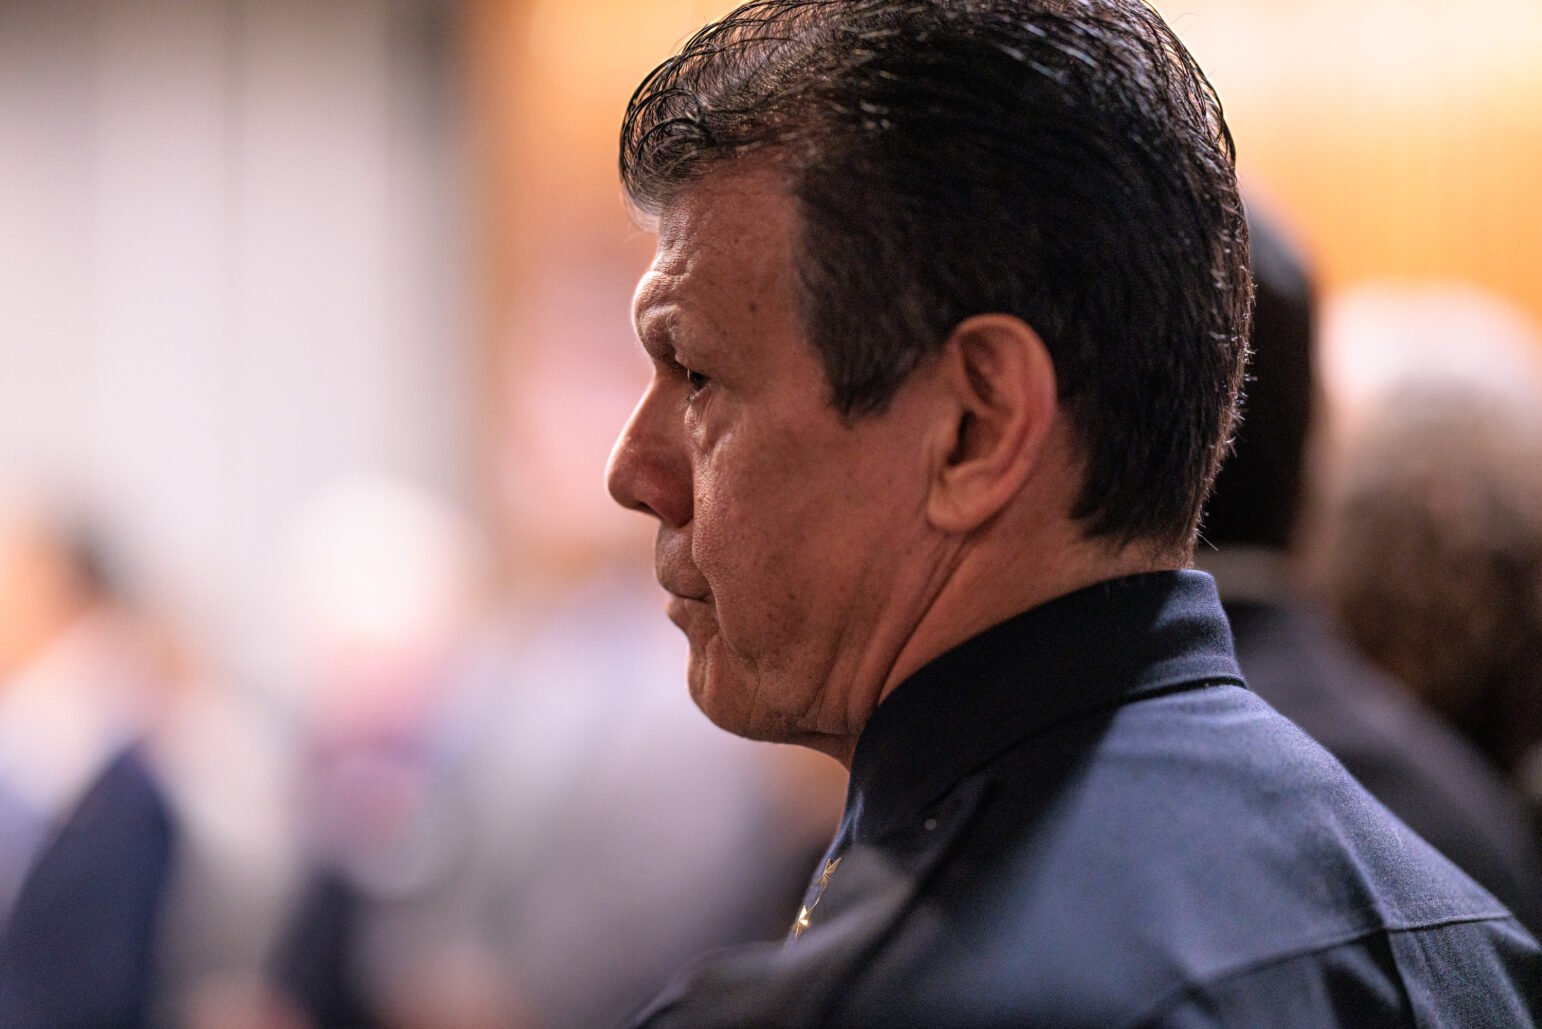 A close-up side profile of a man attending an indoor event. The focus is on his contemplative expression. He has dark, slicked-back hair and wears a dark shirt with a collar. The background is softly blurred, with indistinct figures suggesting a crowd in a large room.